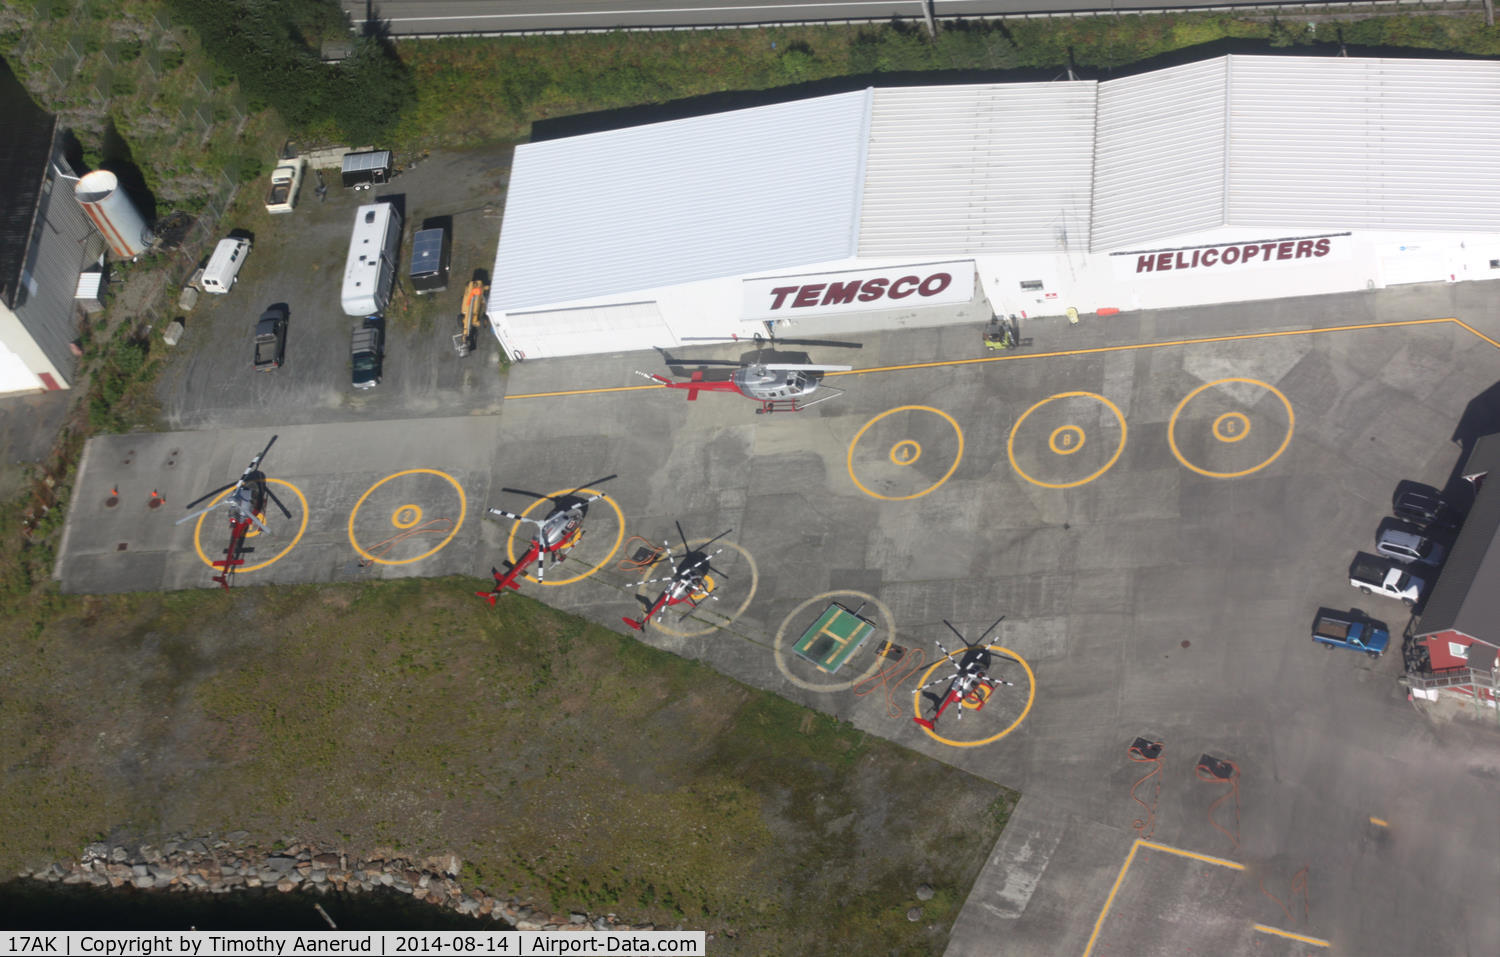 Ketchikan /temsco H/ Heliport (17AK) - Temsco Helicoptor base.  Stiched from several photos while flying by in N409PA